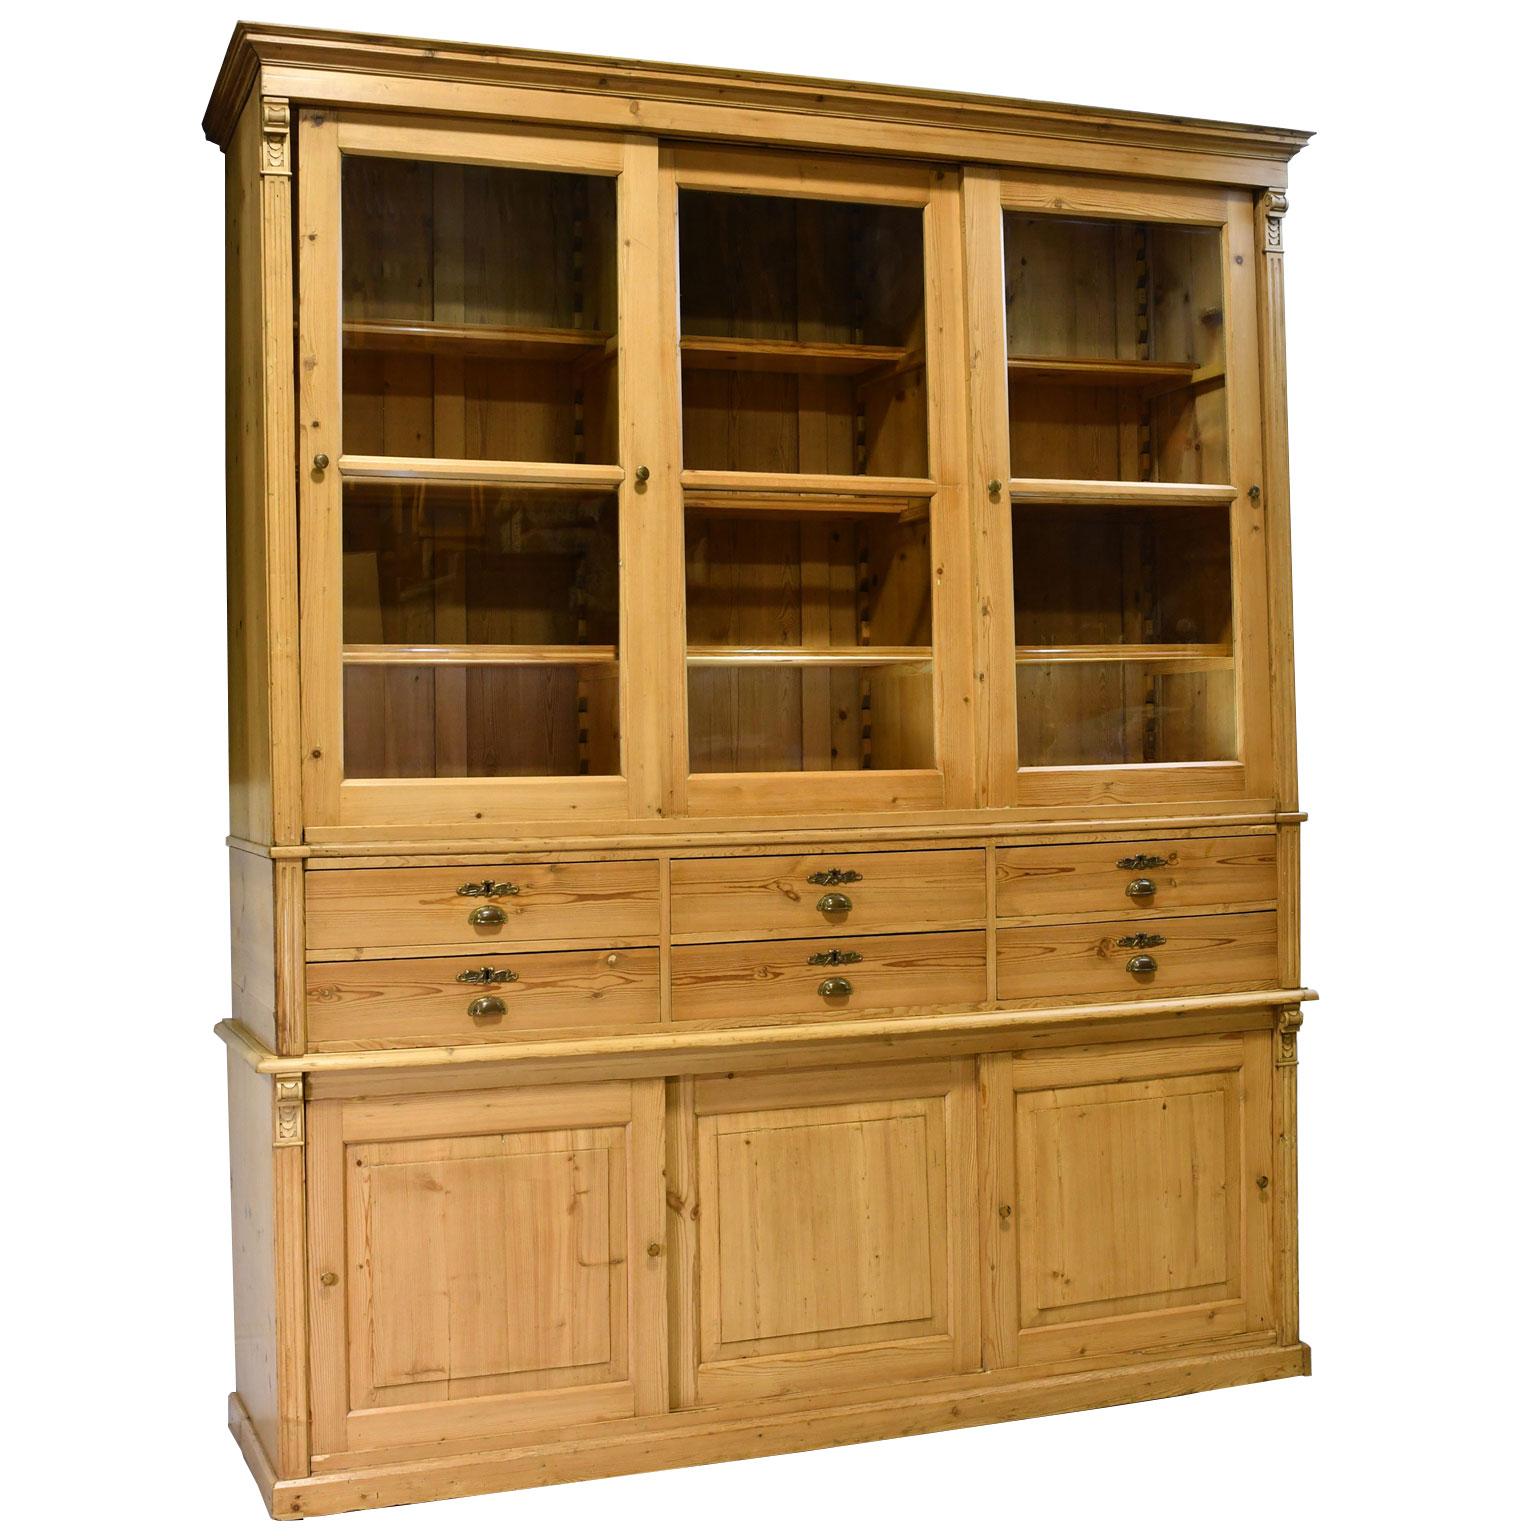 Country Large Store Cabinet or Bookcase in Pine, Northern, Europe, circa 1880